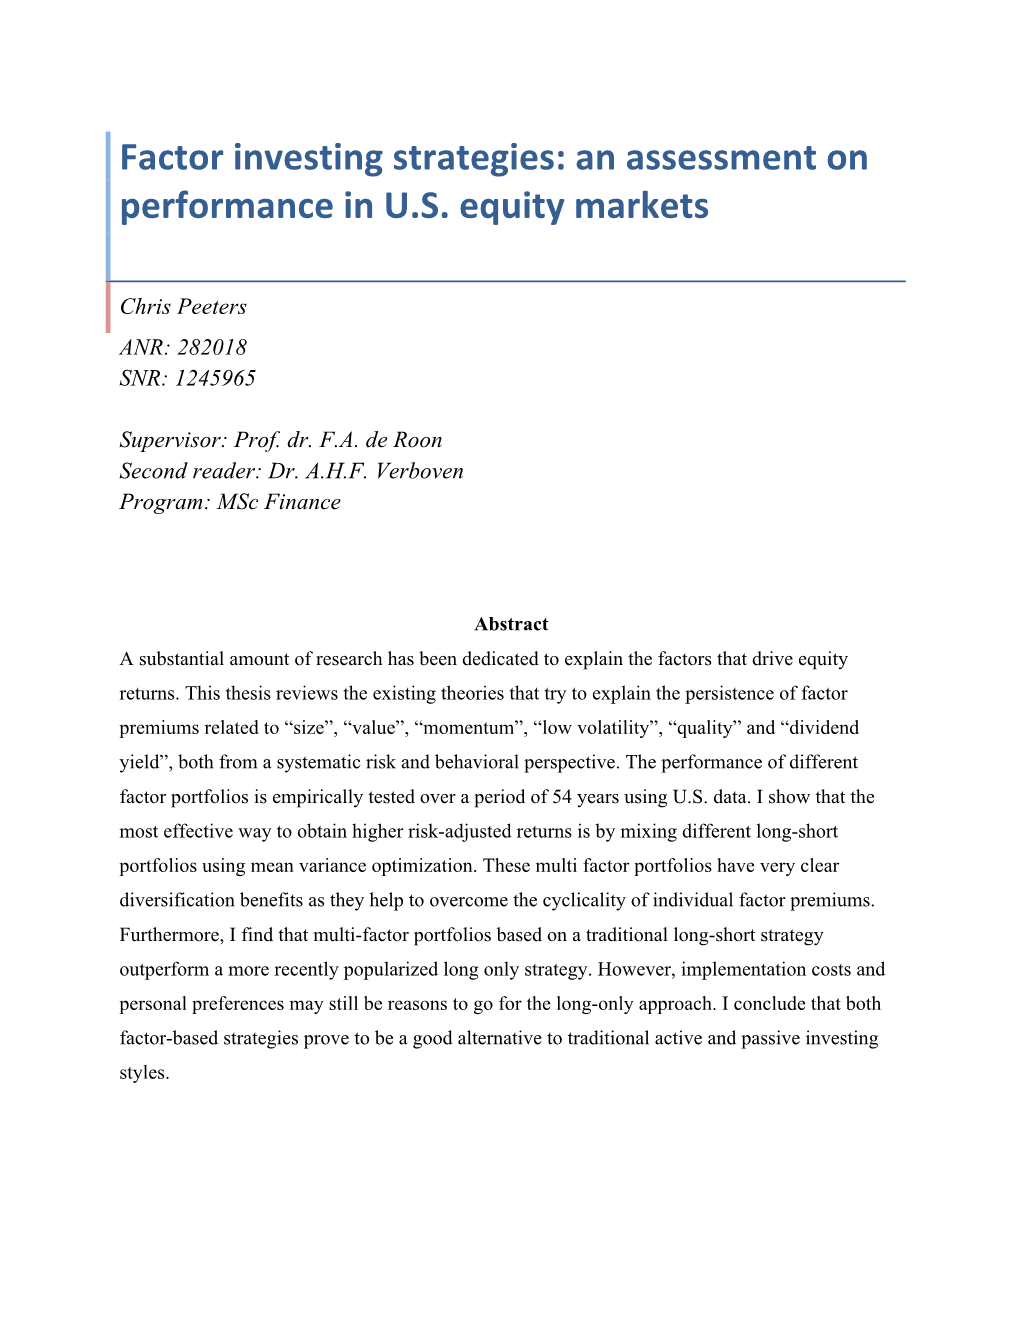 Factor Investing Strategies: an Assessment on Performance in U.S. Equity Markets